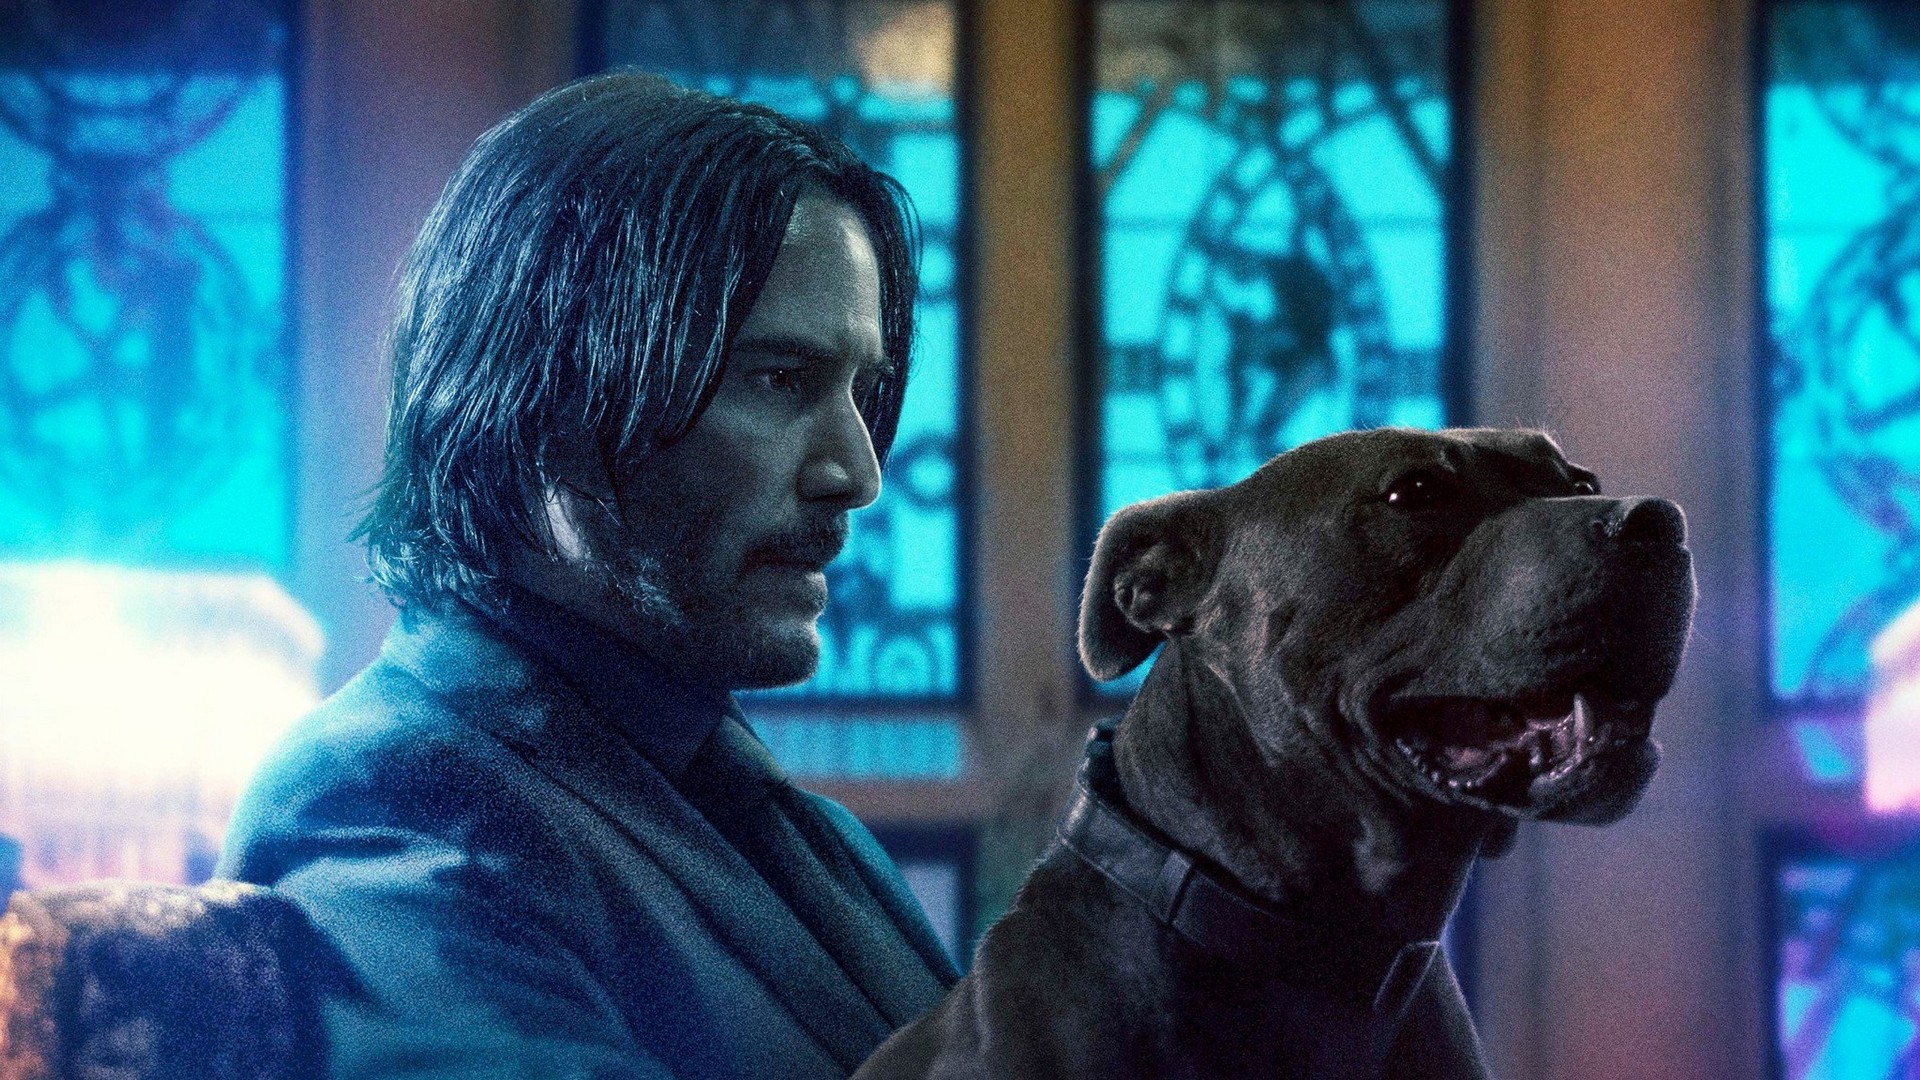 John Wick Chapter 3 Parabellum Wallpaper with high-resolution 1920x1080 pixel. You can use this poster wallpaper for your Desktop Computers, Mac Screensavers, Windows Backgrounds, iPhone Wallpapers, Tablet or Android Lock screen and another Mobile device